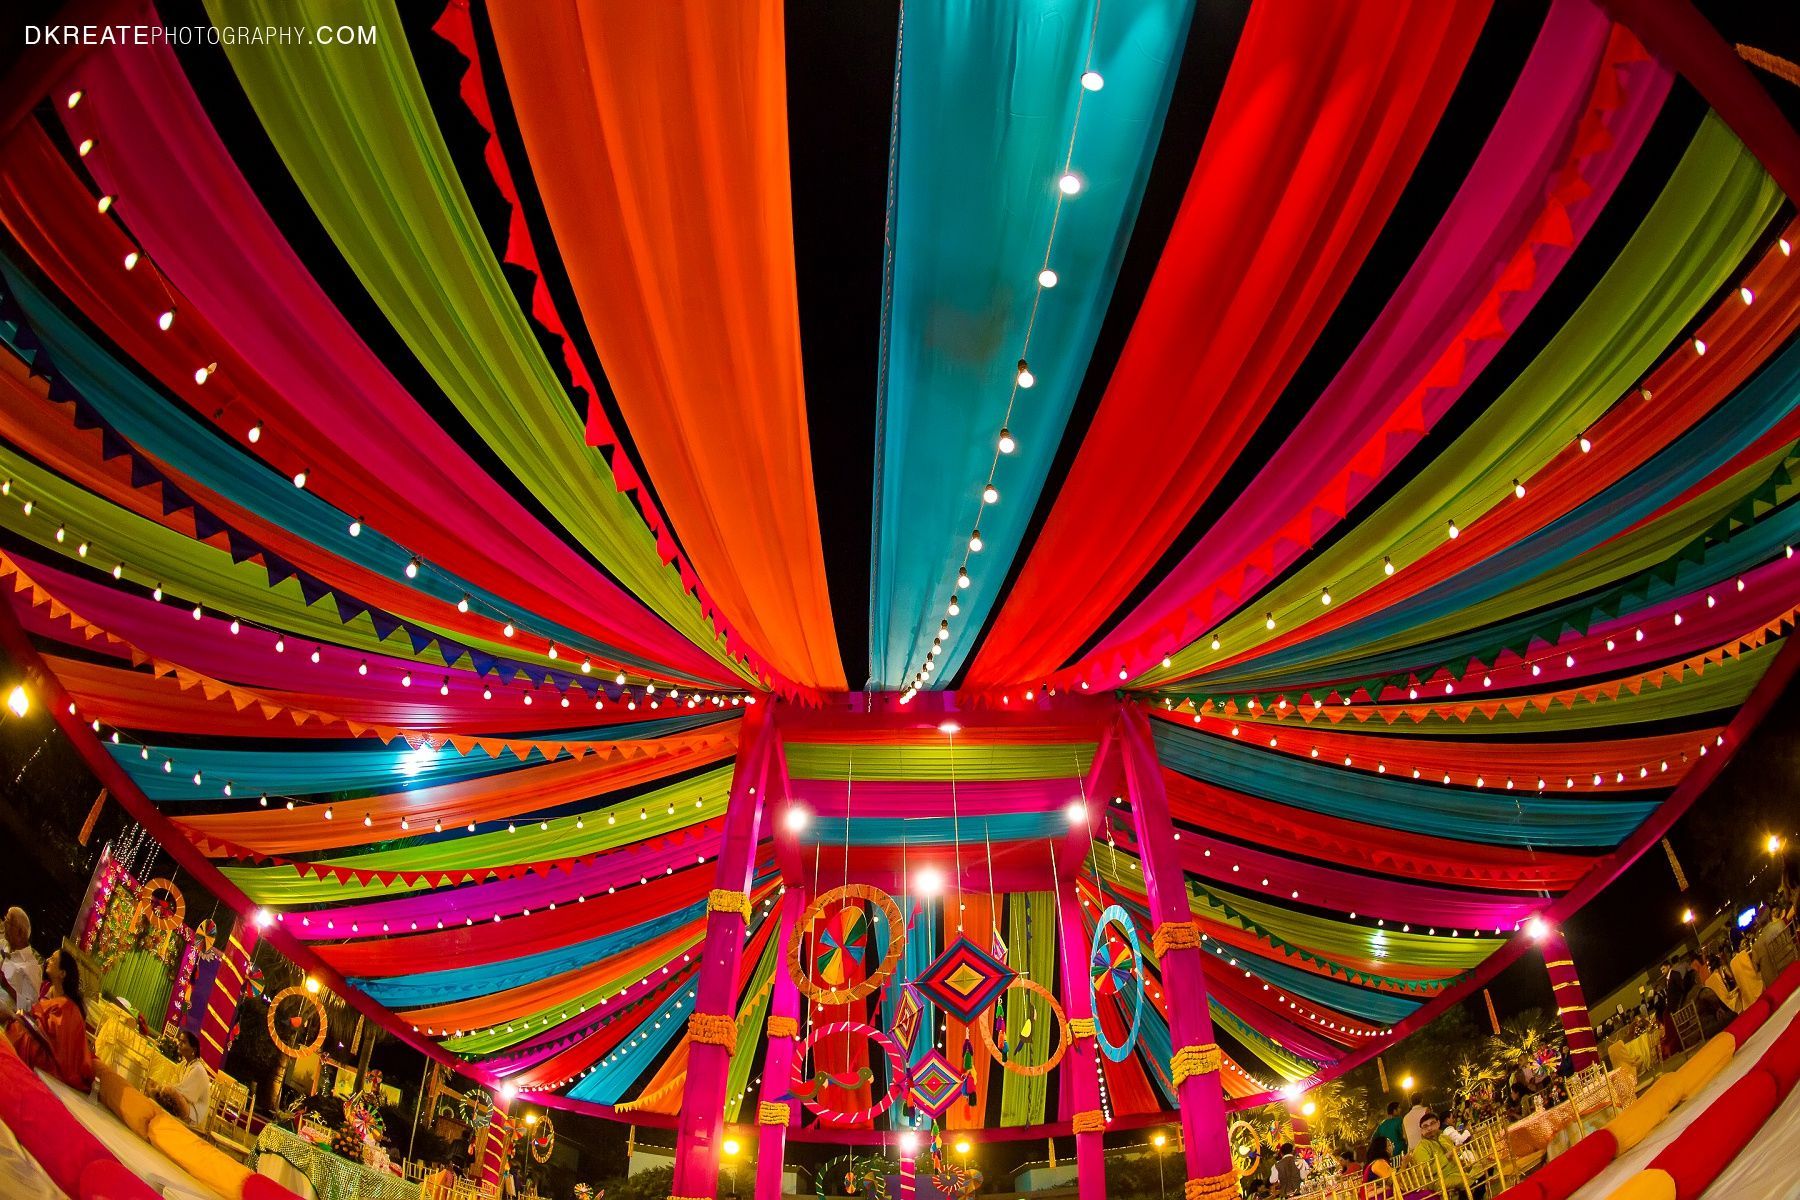 Indian wedding backdrop ideas. Colorful. Mela themed. Colorful woollen thread hanging for the wedding. Mehndi decor. Vibrant and